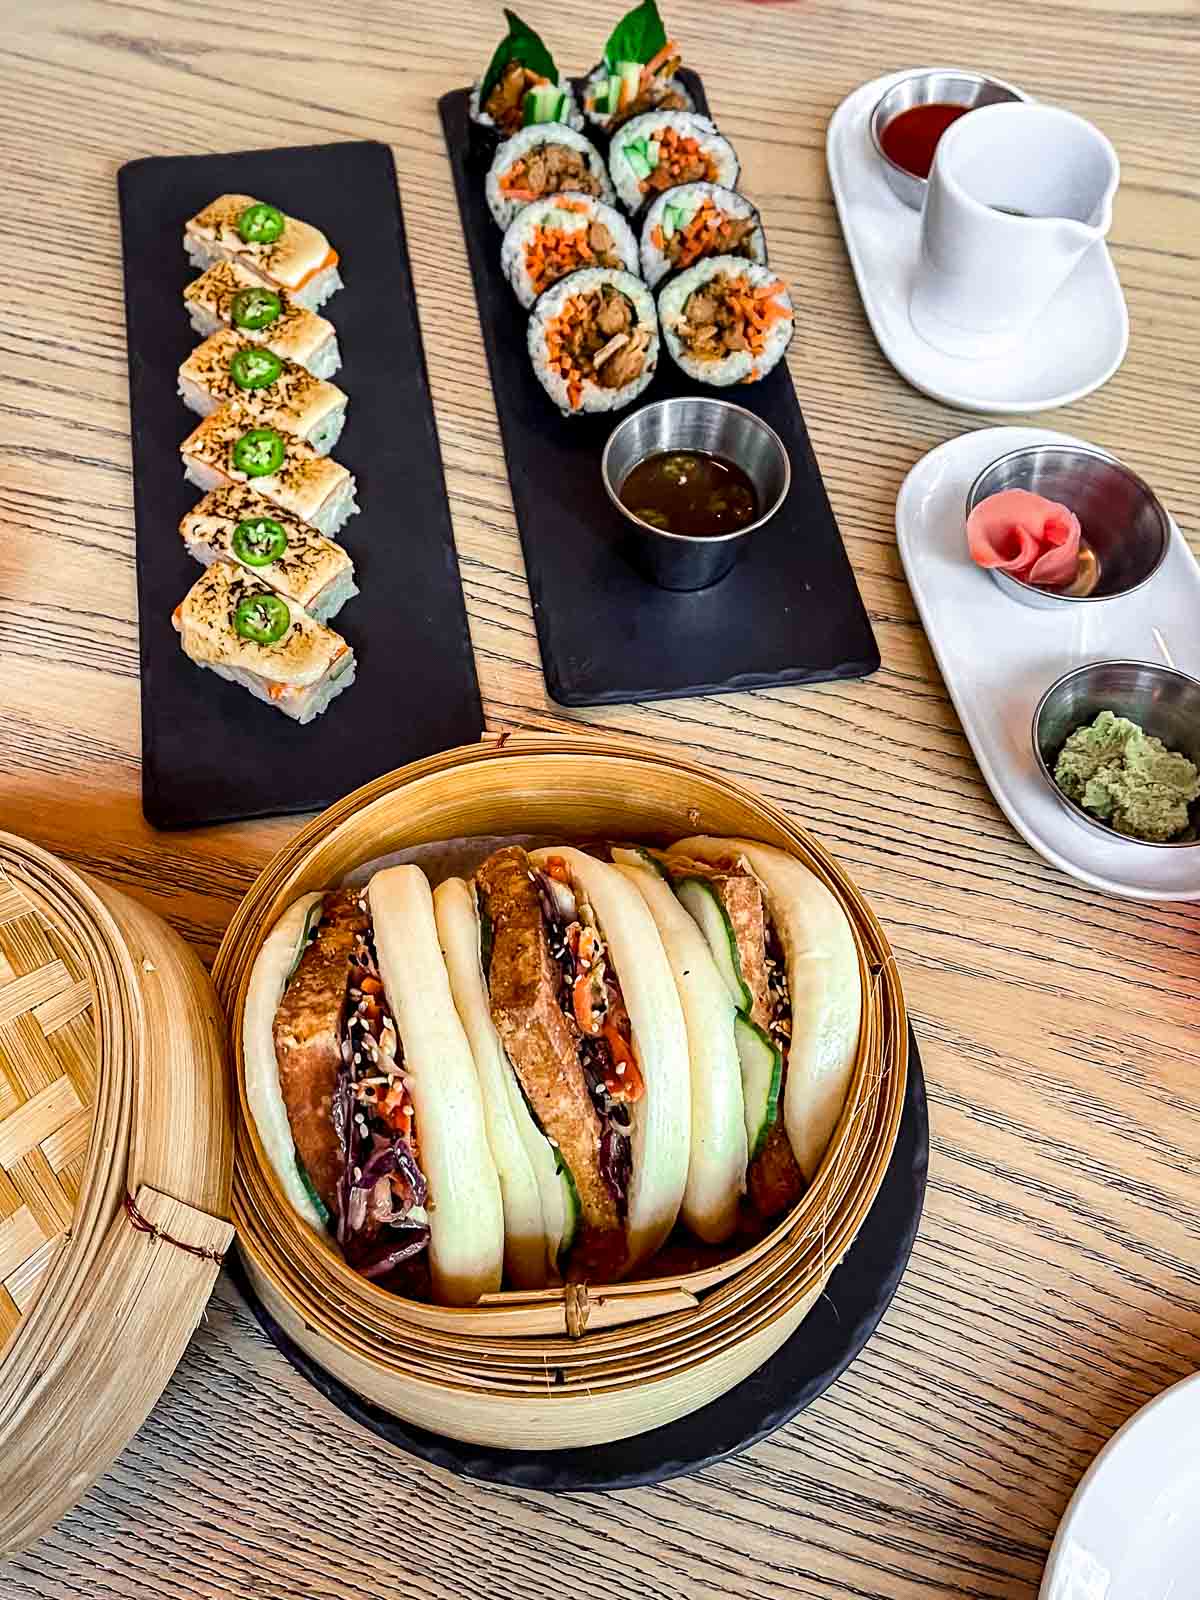 25 Best Vegan Restaurants in Vancouver BC for 2023 - selection of bao buns and plant-based sushi from MILA.